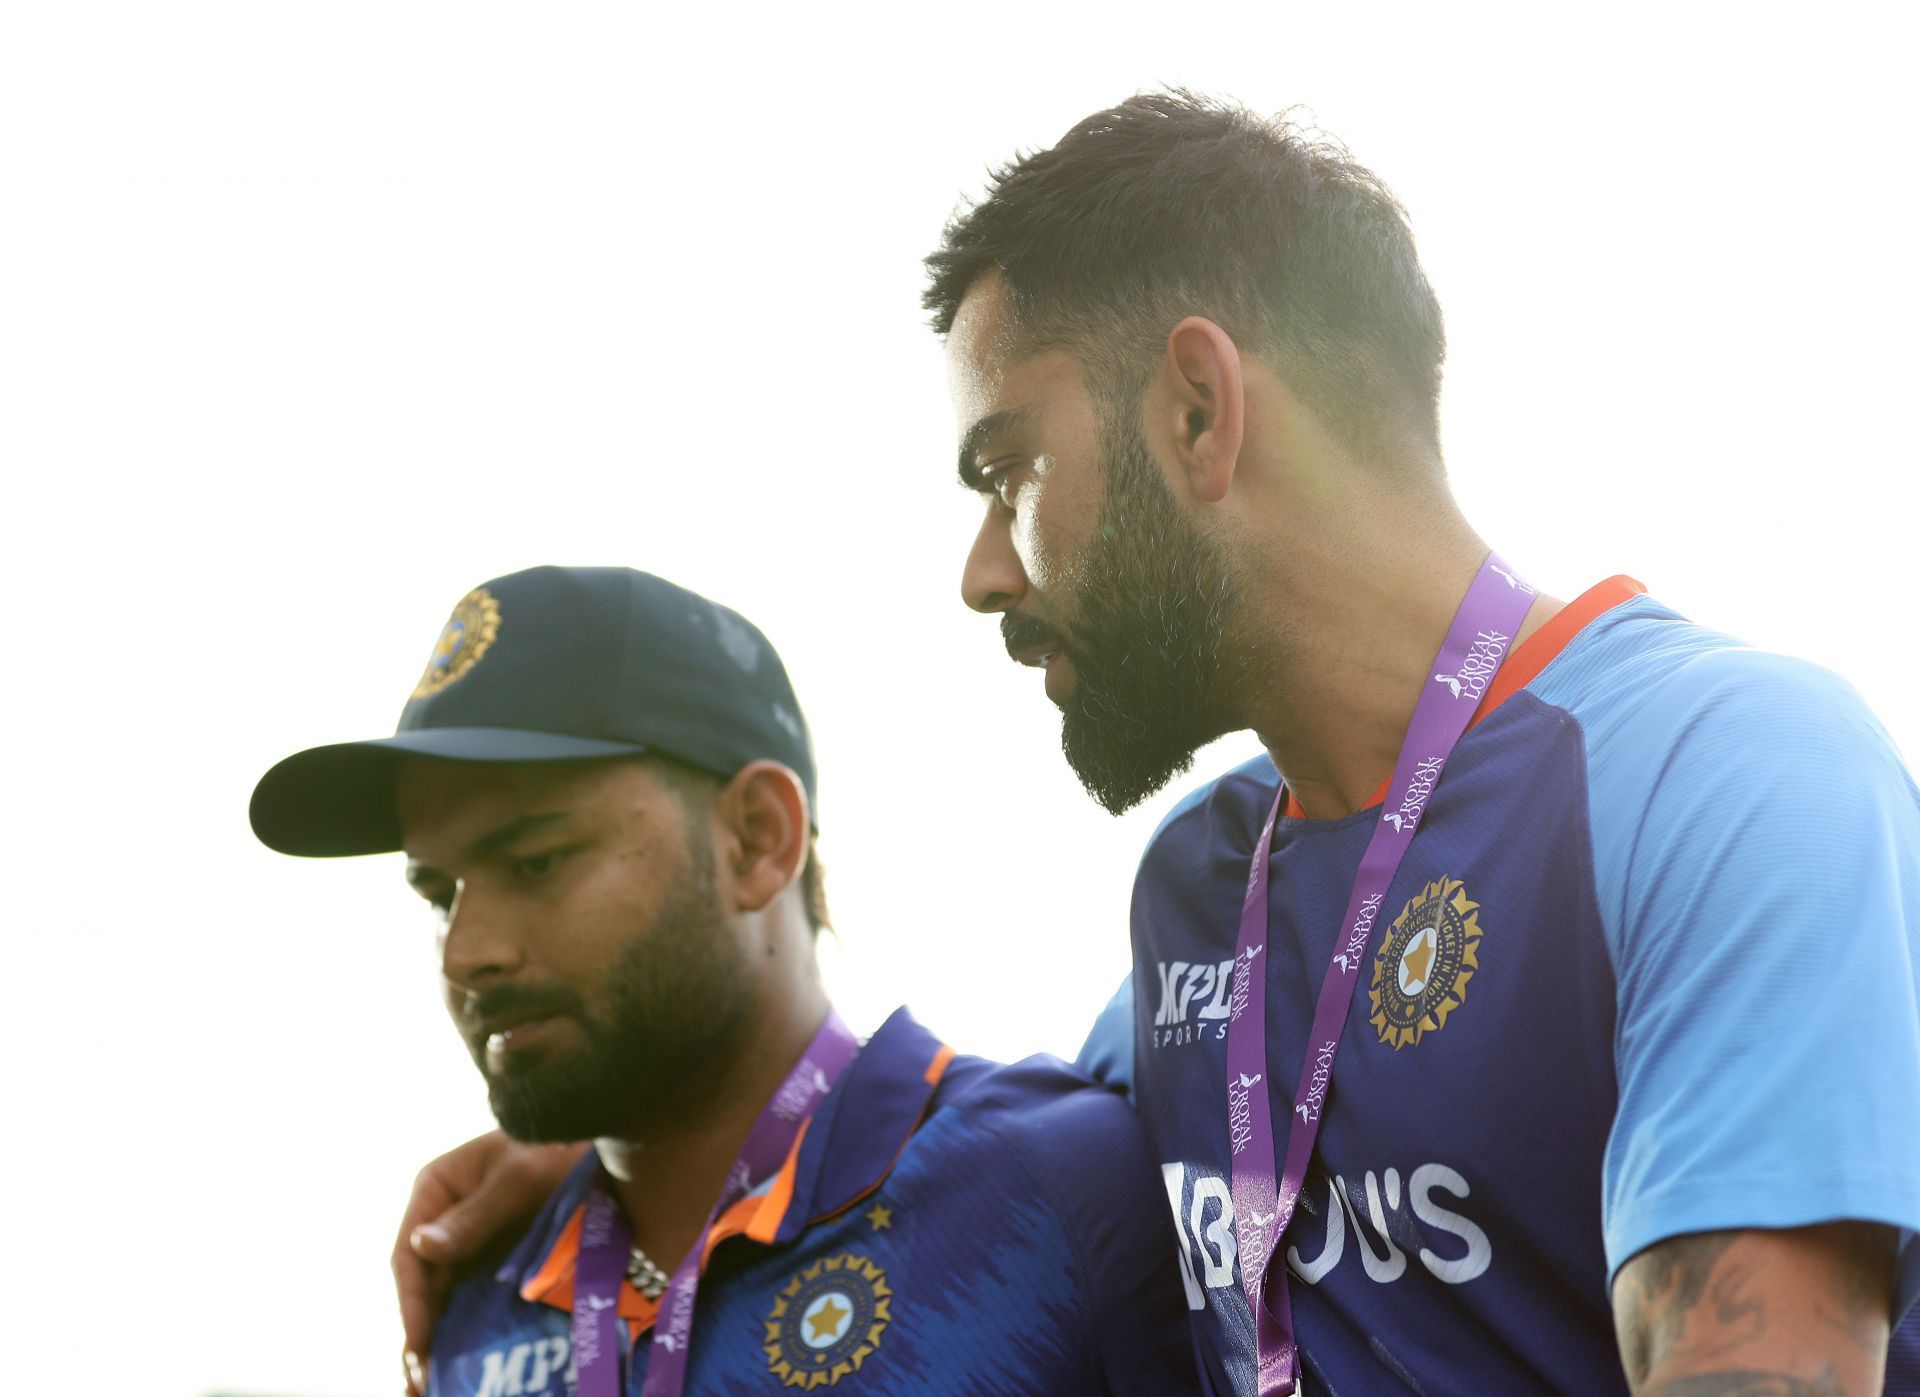 Rishabh Pant (L) and Virat Kohli (R) have shared many entertaining moments on the field. (Credit: Getty Images)